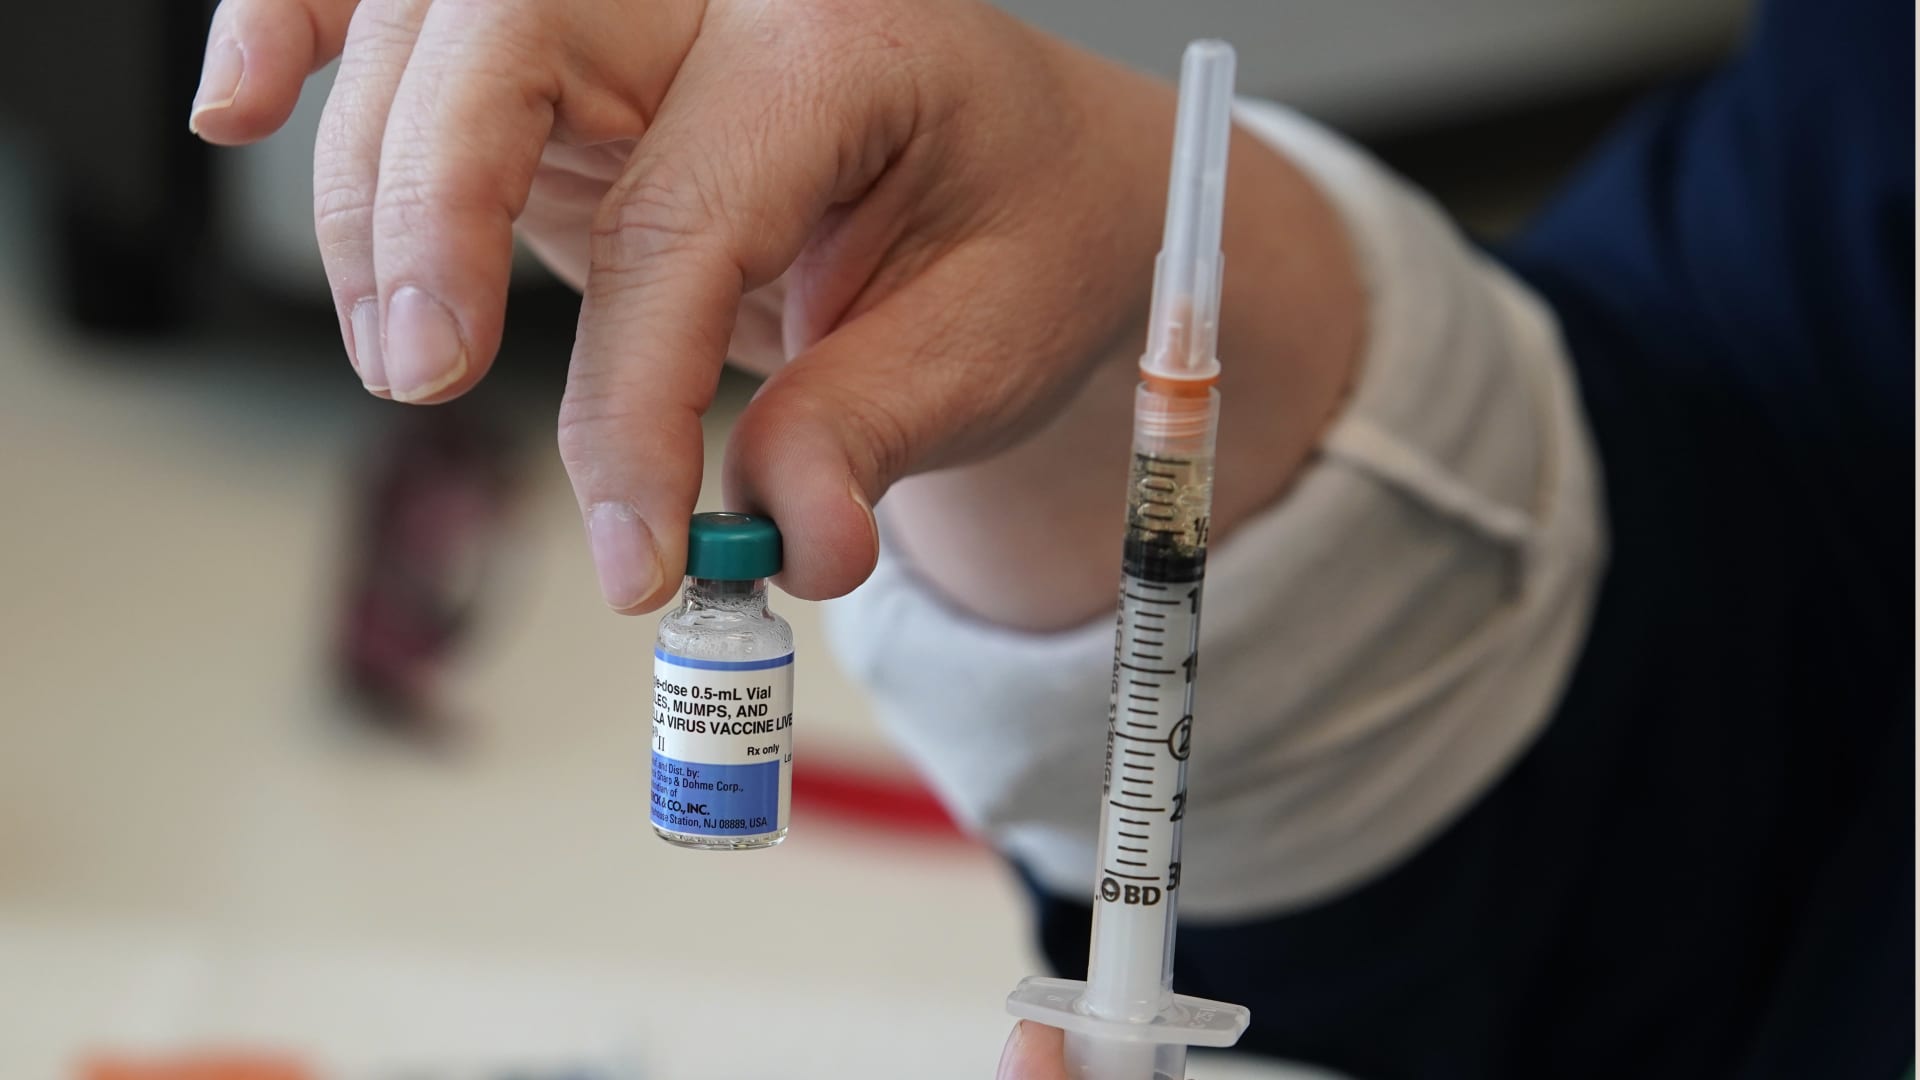 Measles poses growing threat to kids as vaccinations decline globally, CDC and WHO warn